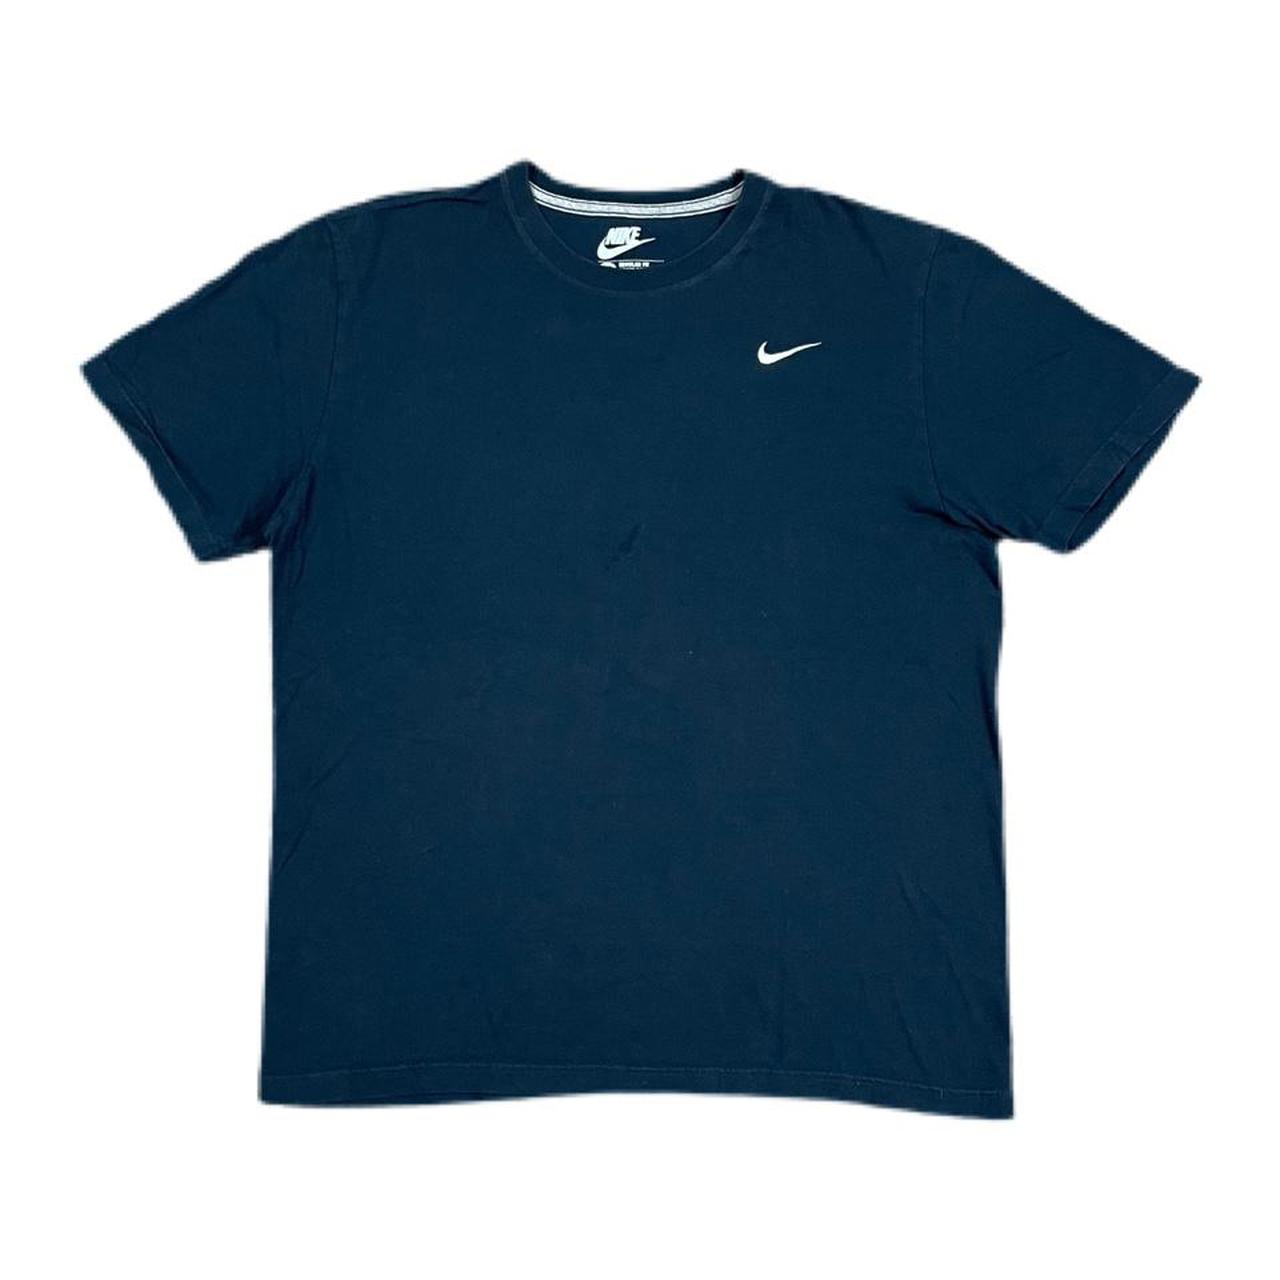 Nike Navy Blue White Swoosh Embroidered T... - Depop